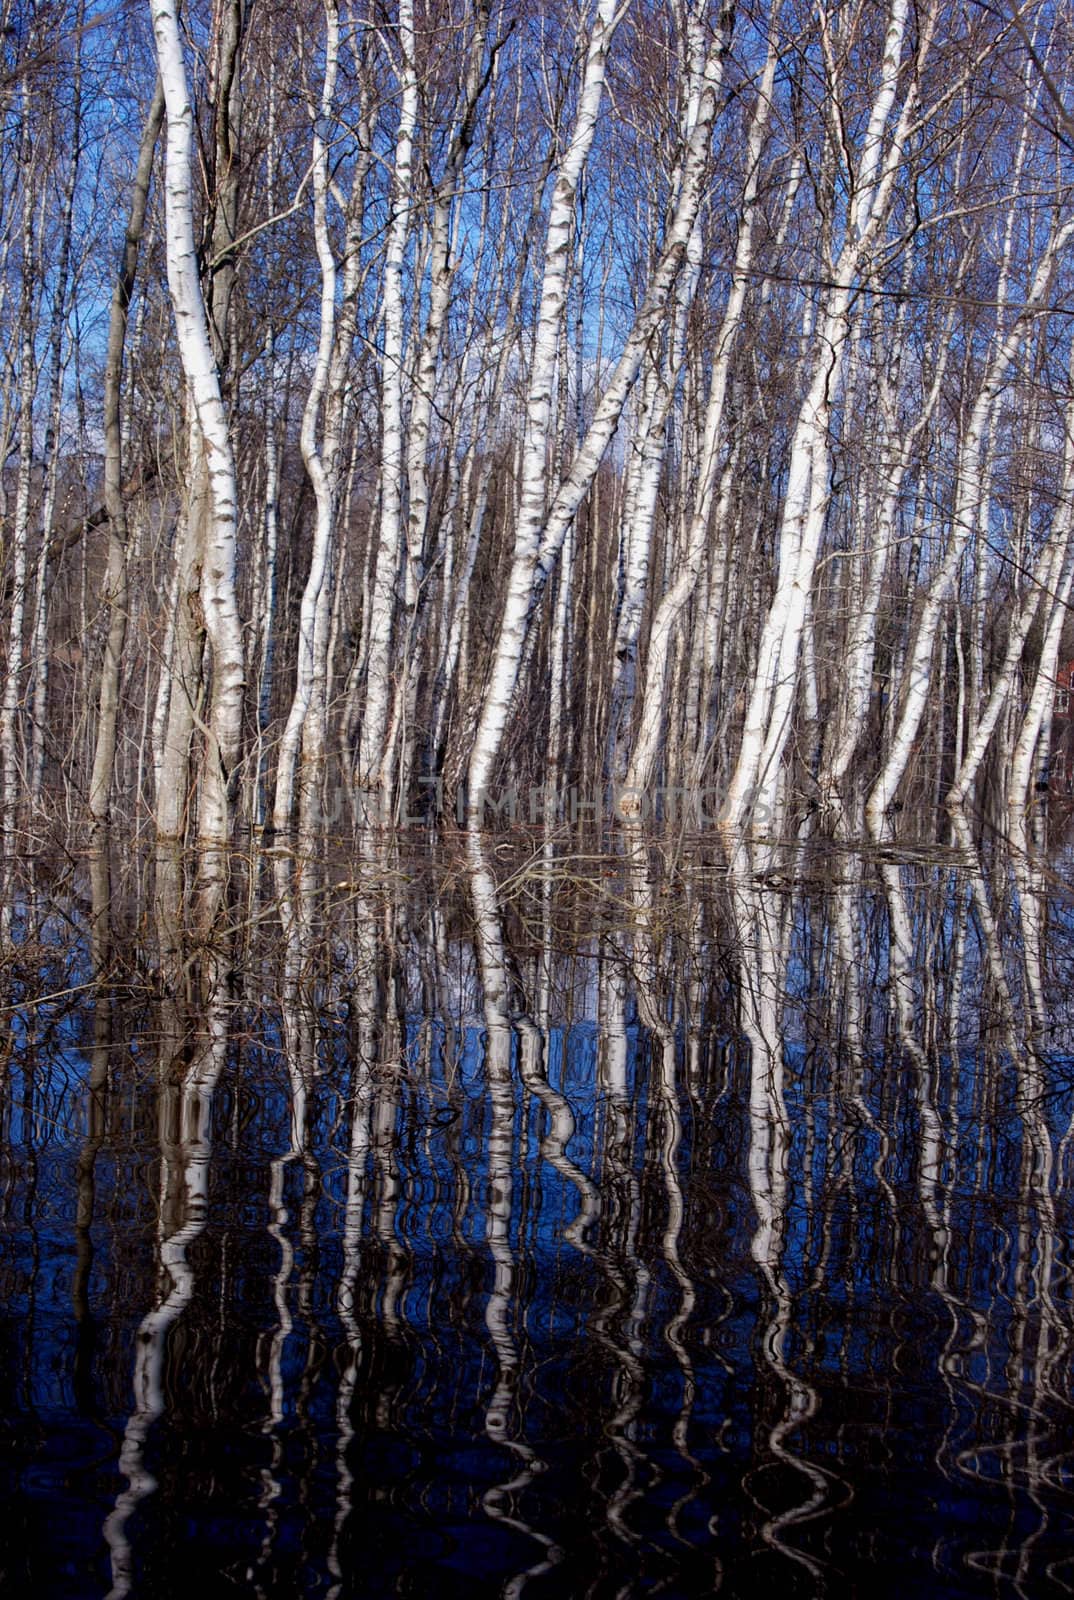 birches in the spring flood water and reflection